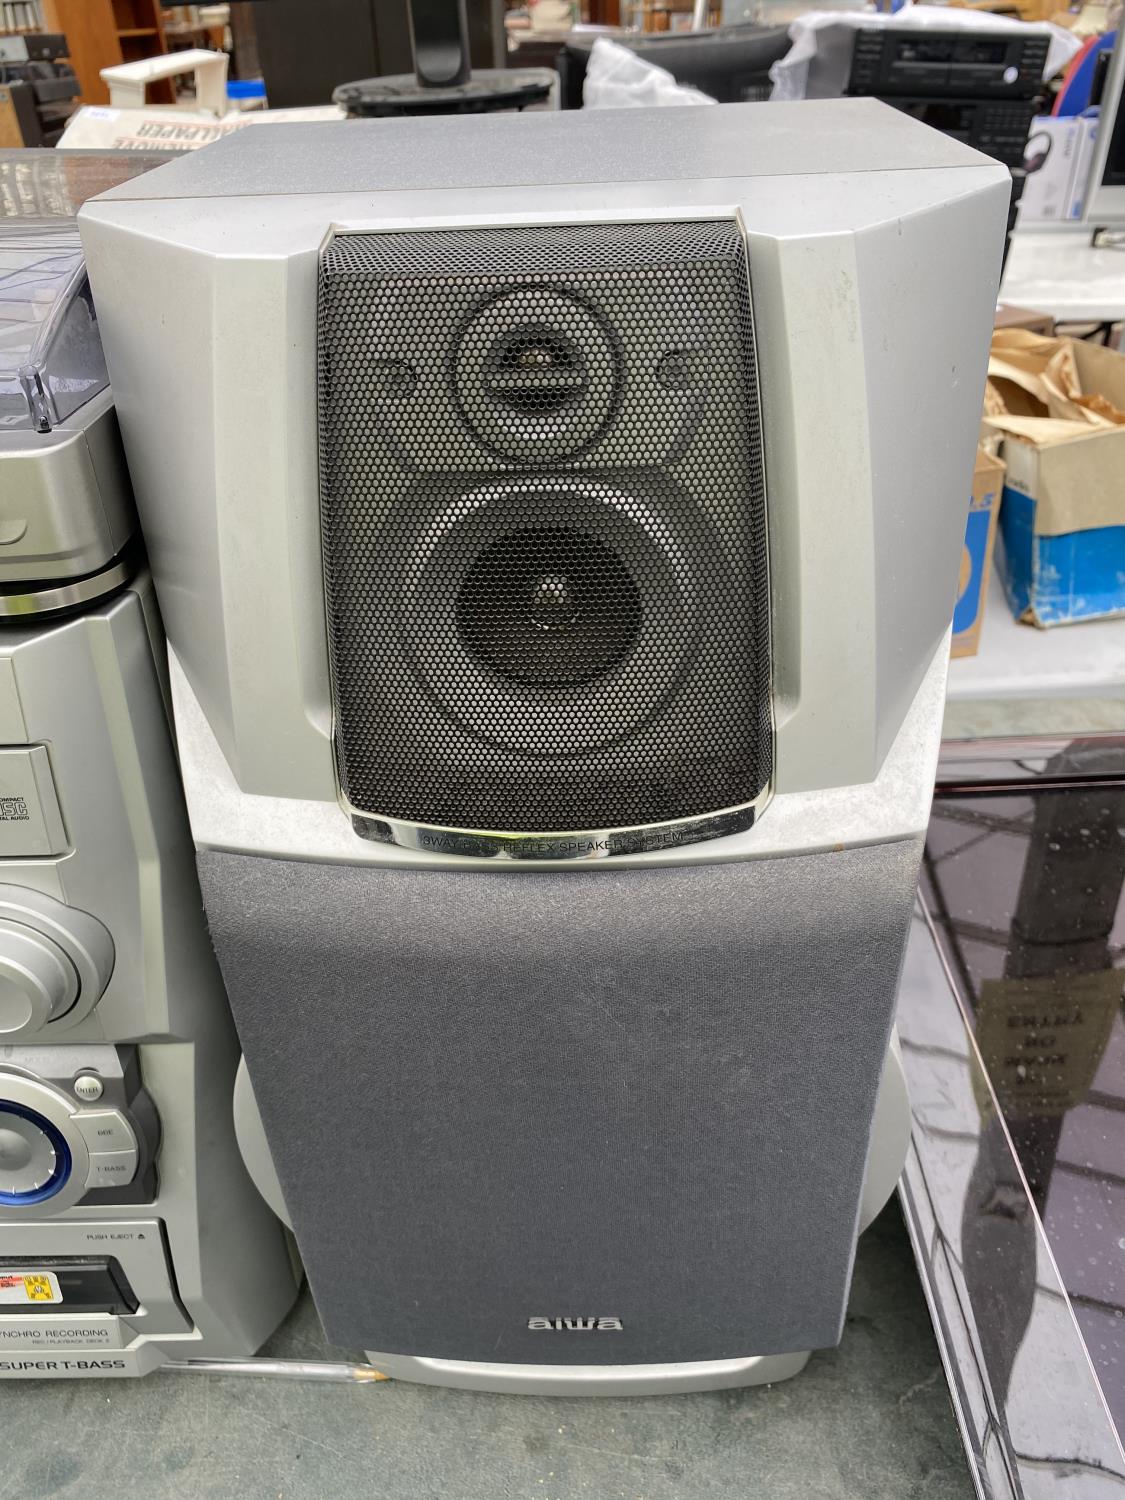 AN AIWA STEREO SYSTEM WITH TWO SPEAKERS IN W/O BUT NO WARRENTY - Image 5 of 5